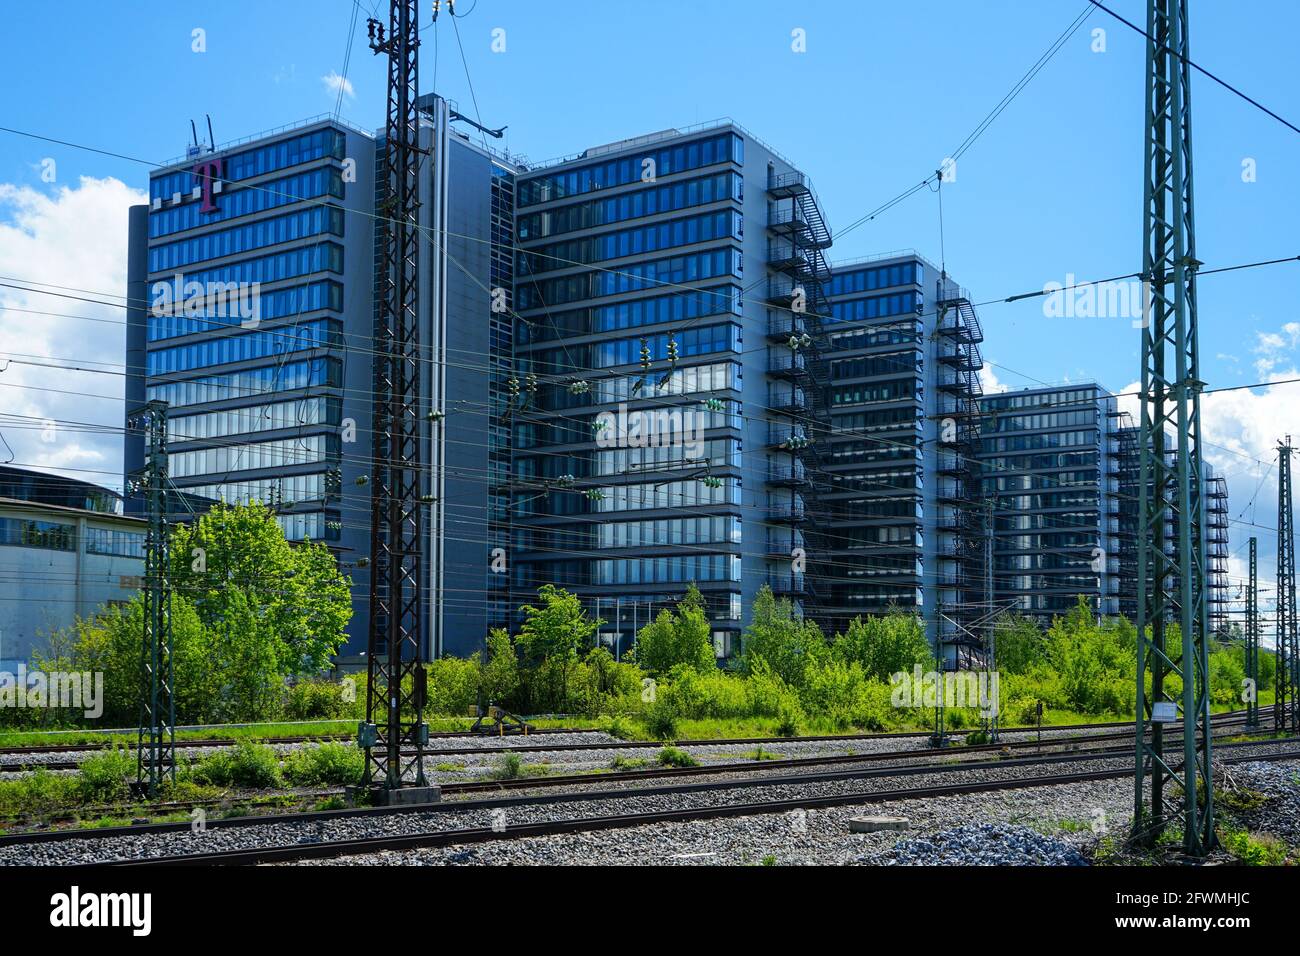 View from the Leuchtenbergring S-Bahn station of the Telekom Center  München, an ensemble of 10 uniform high-rise buildings on Leuchtenbergring  Stock Photo - Alamy